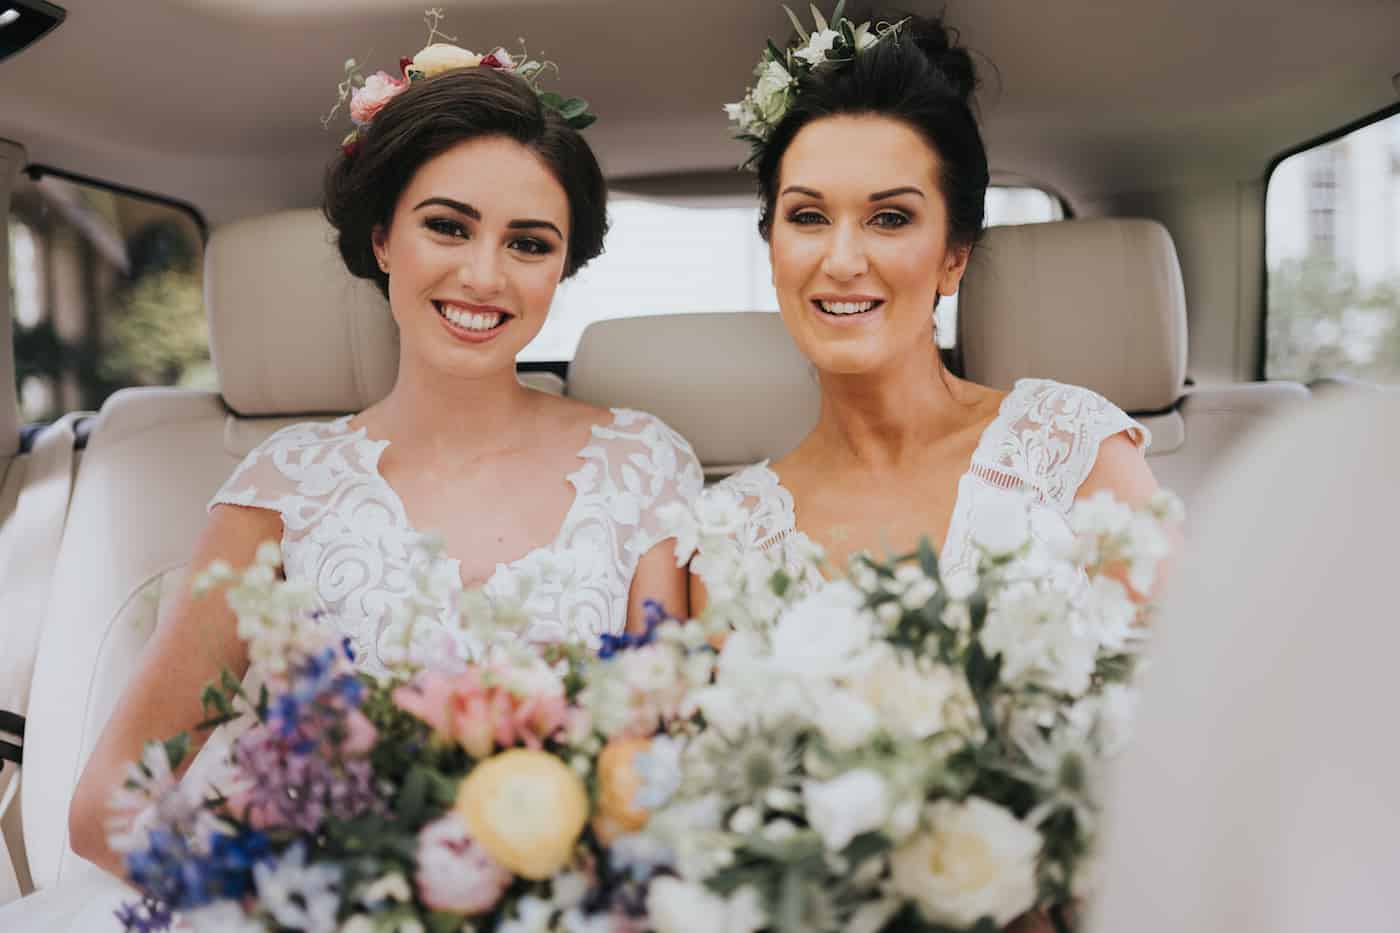 bride and bridesmaid holding bouquet of flowers inside a car